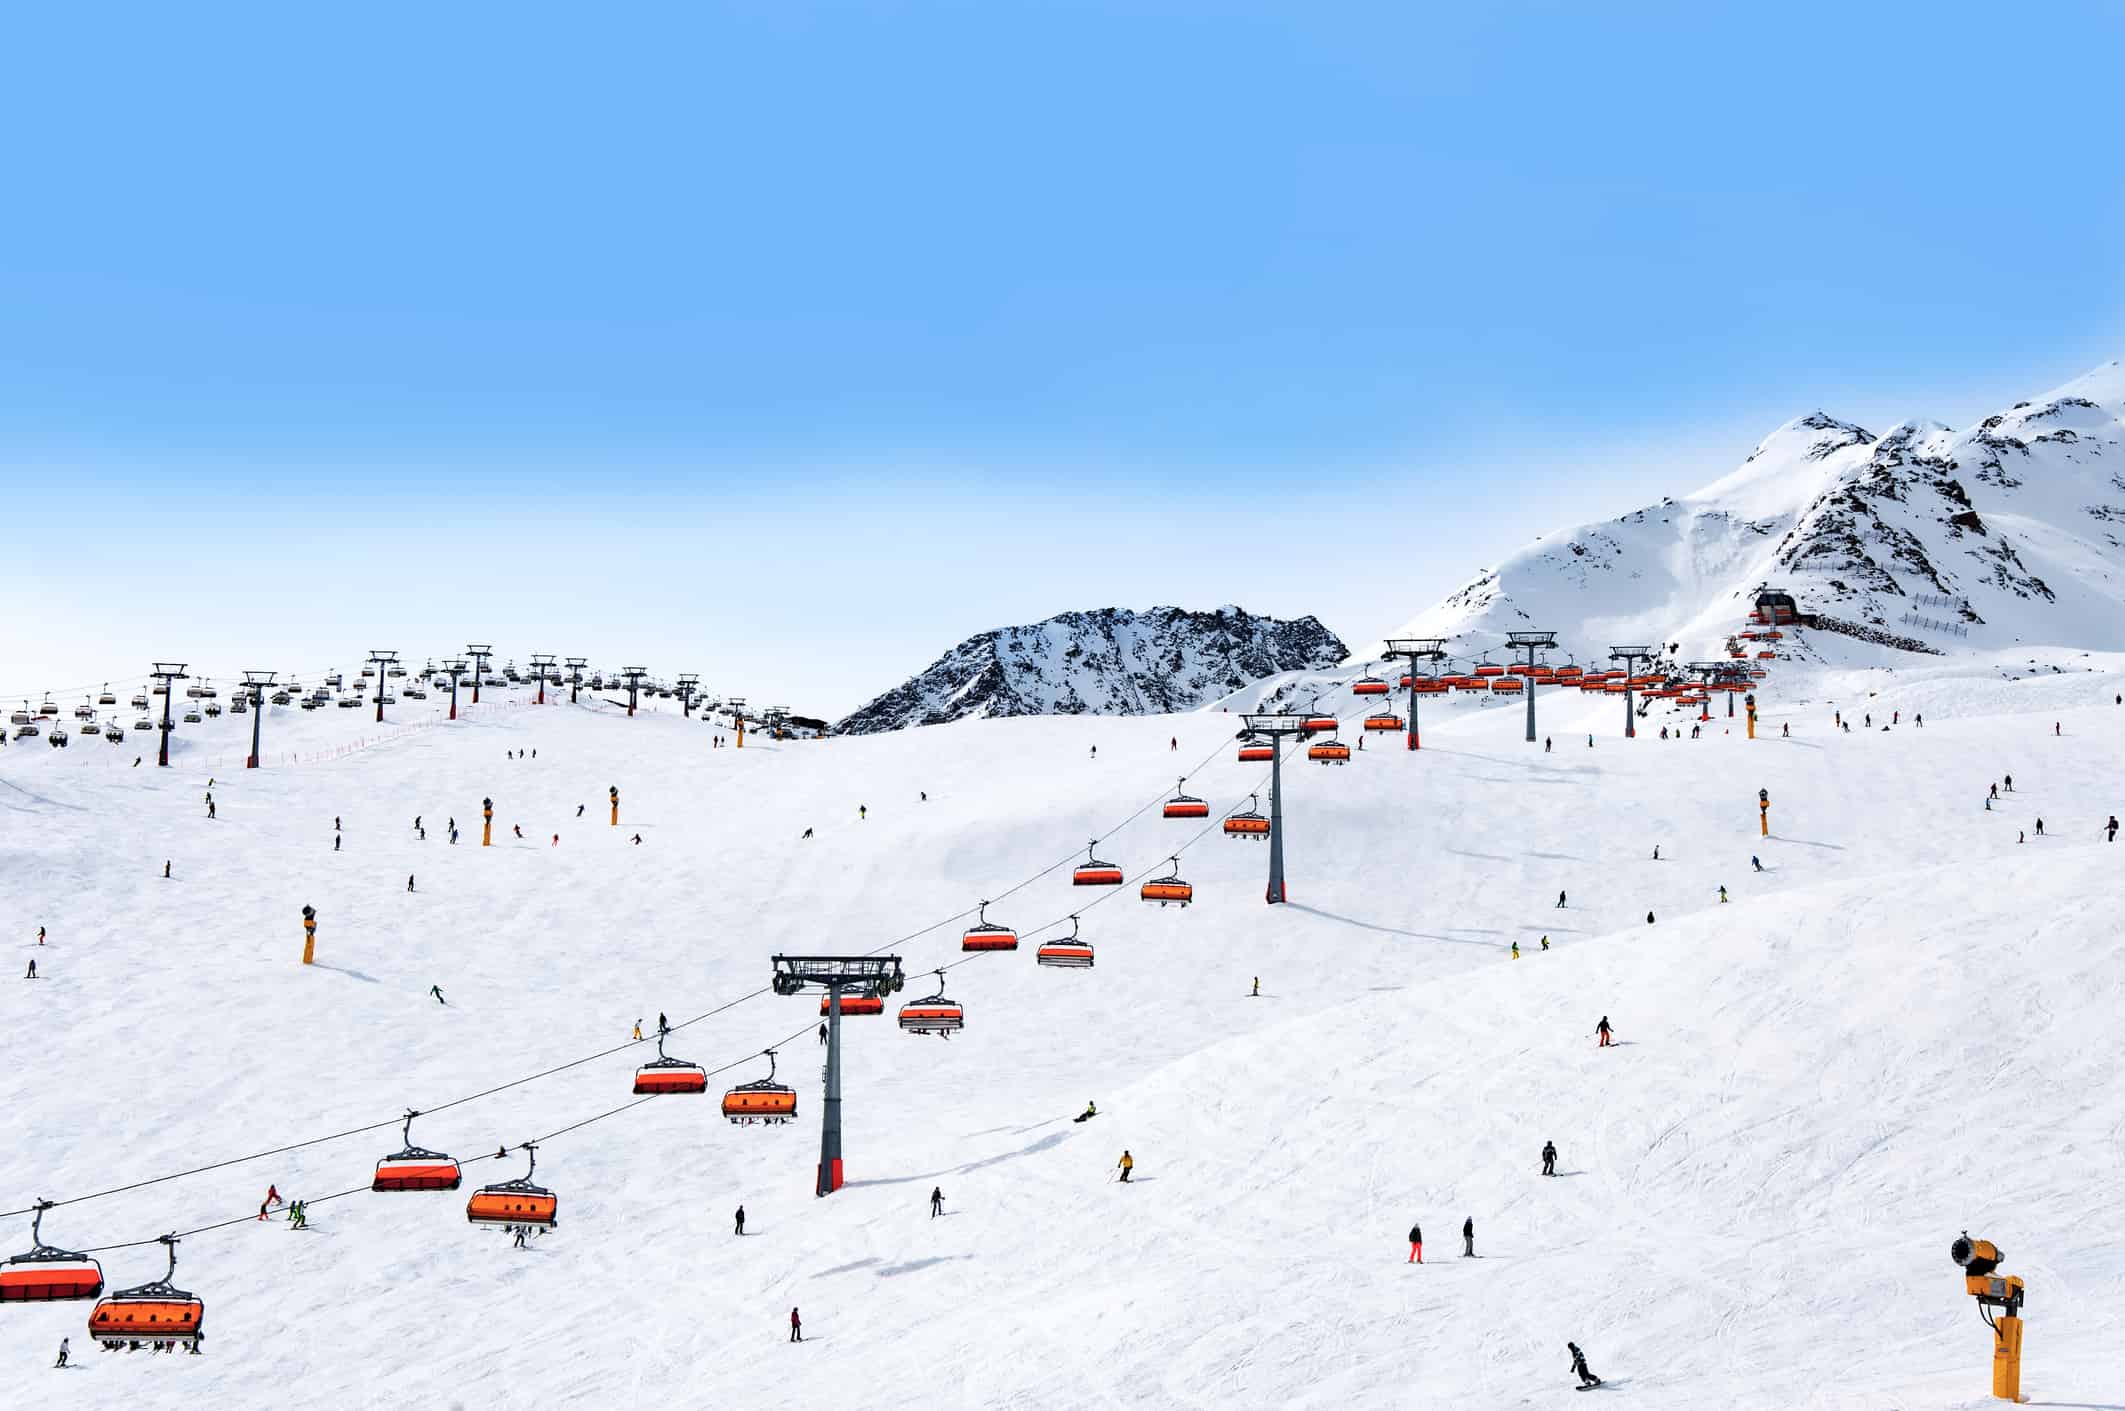 Skiers and chairlifts in Solden, Austri